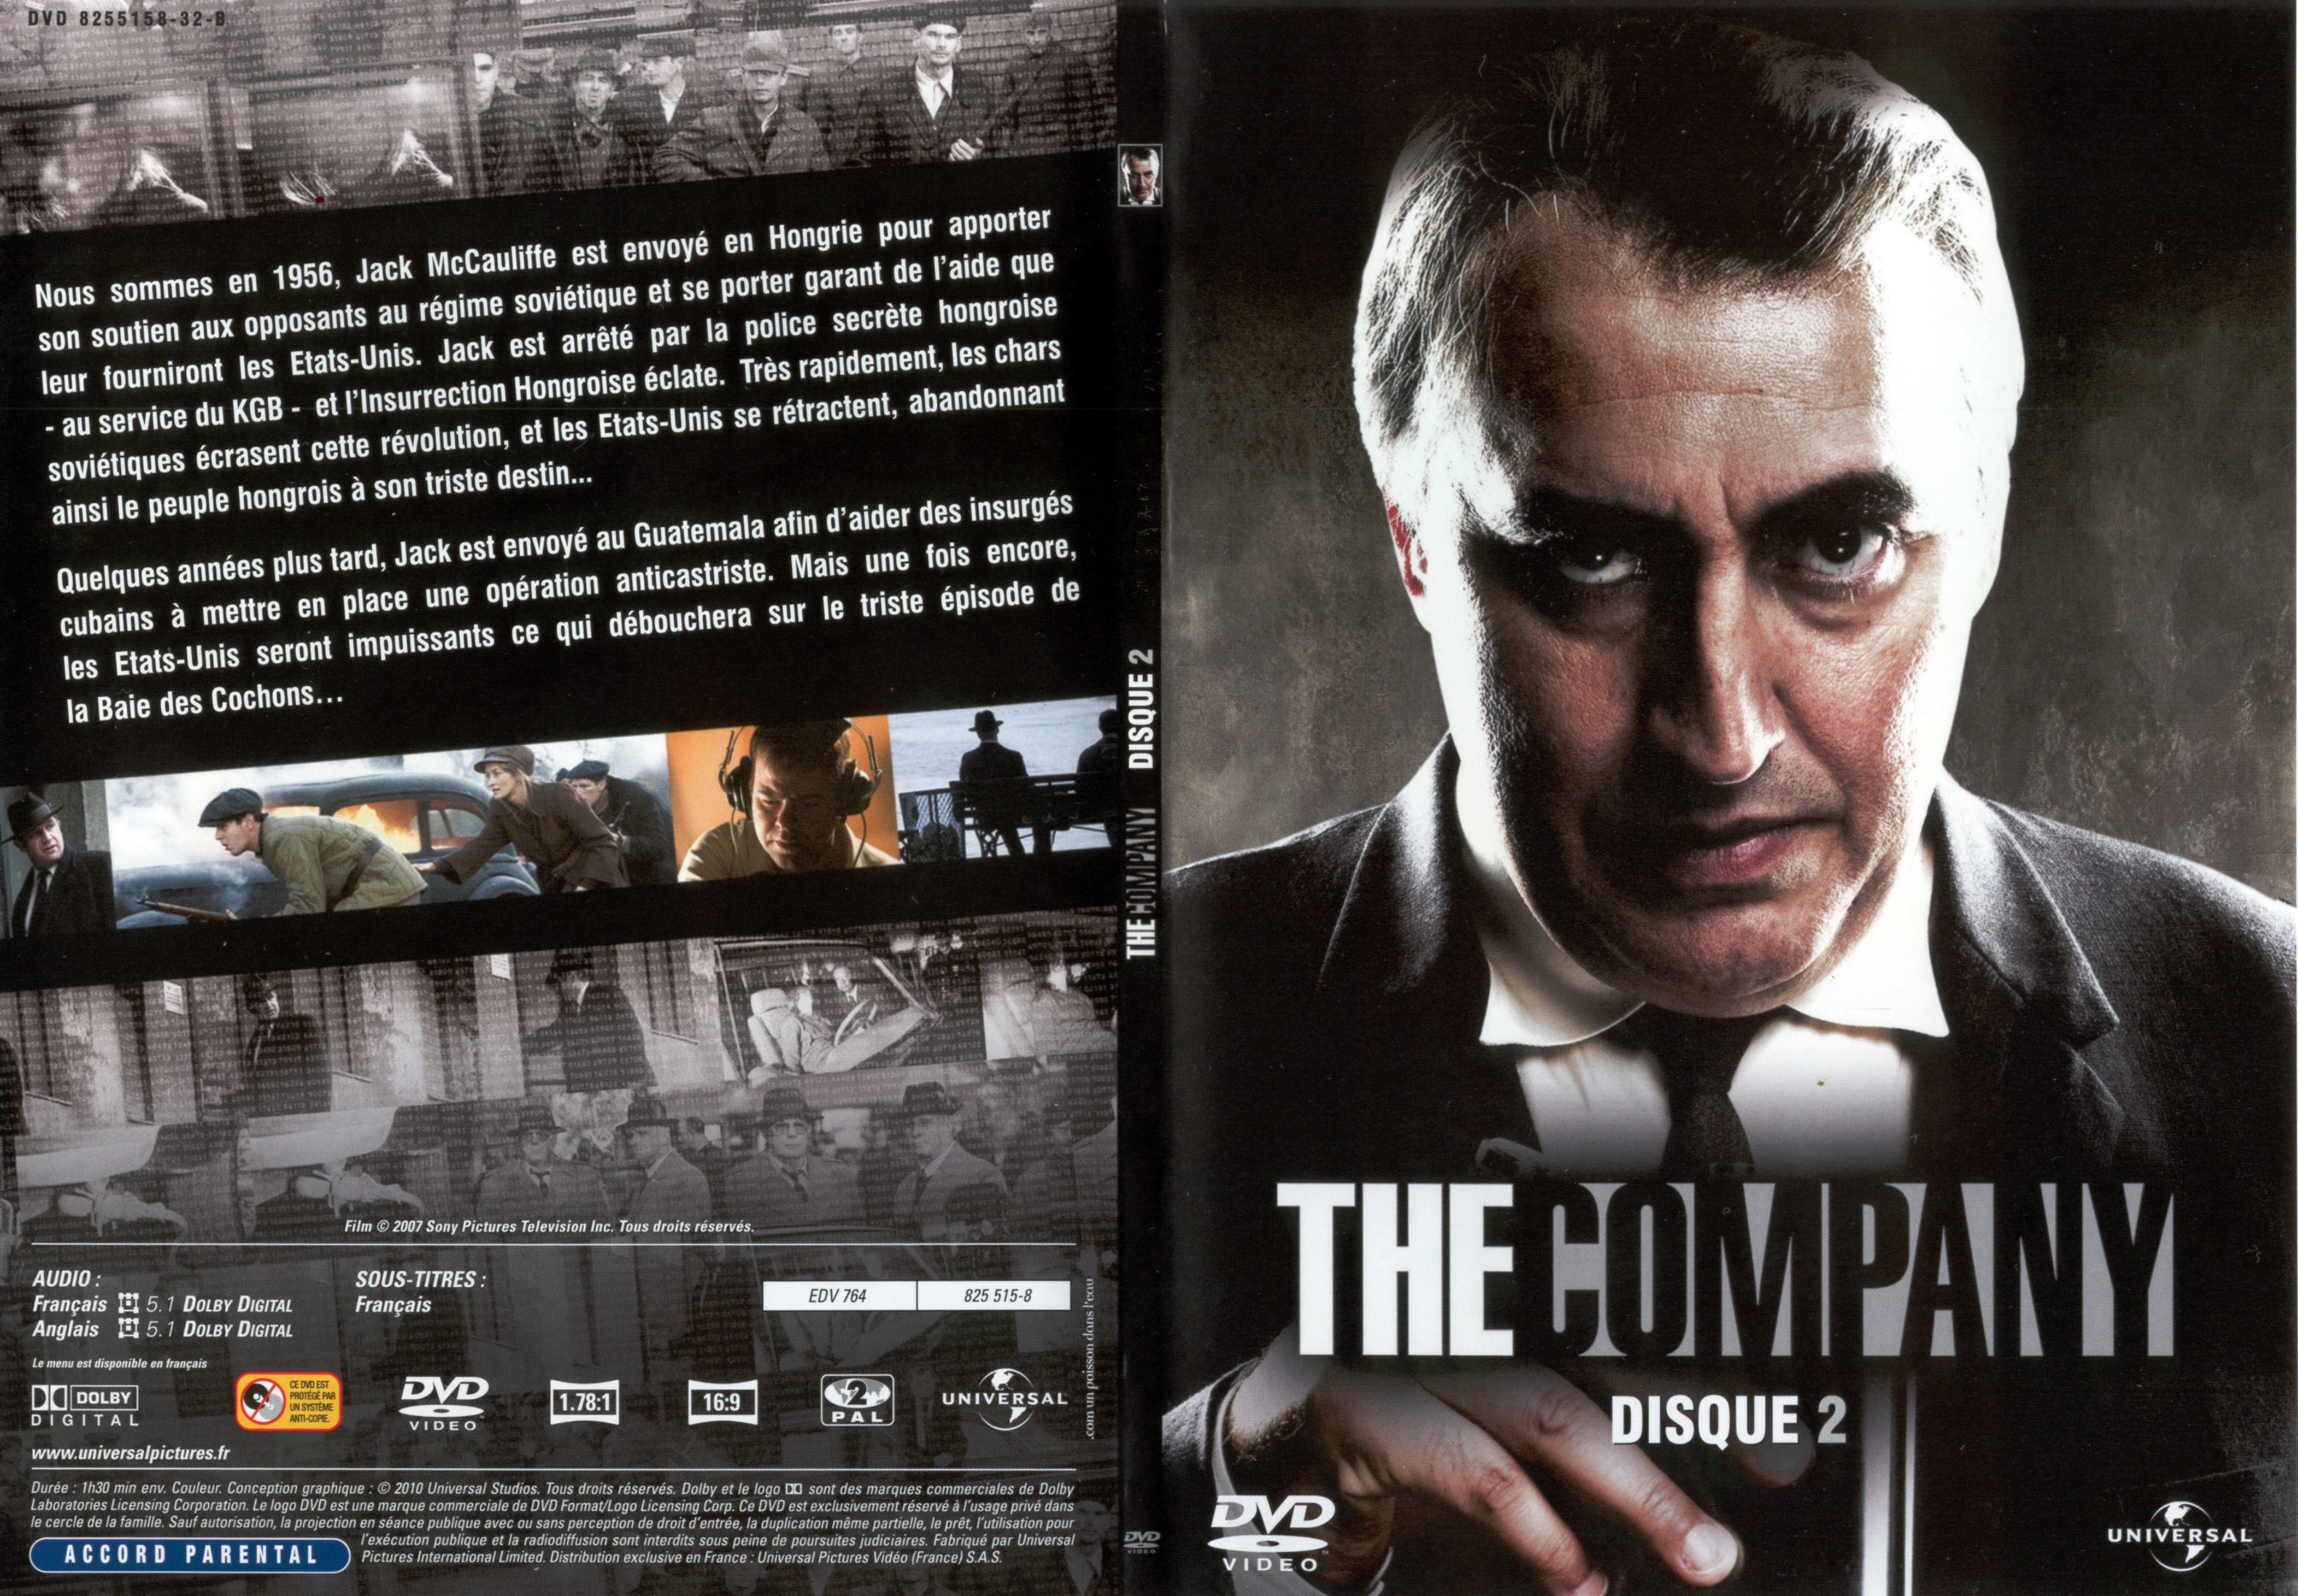 Jaquette DVD The company DVD 2